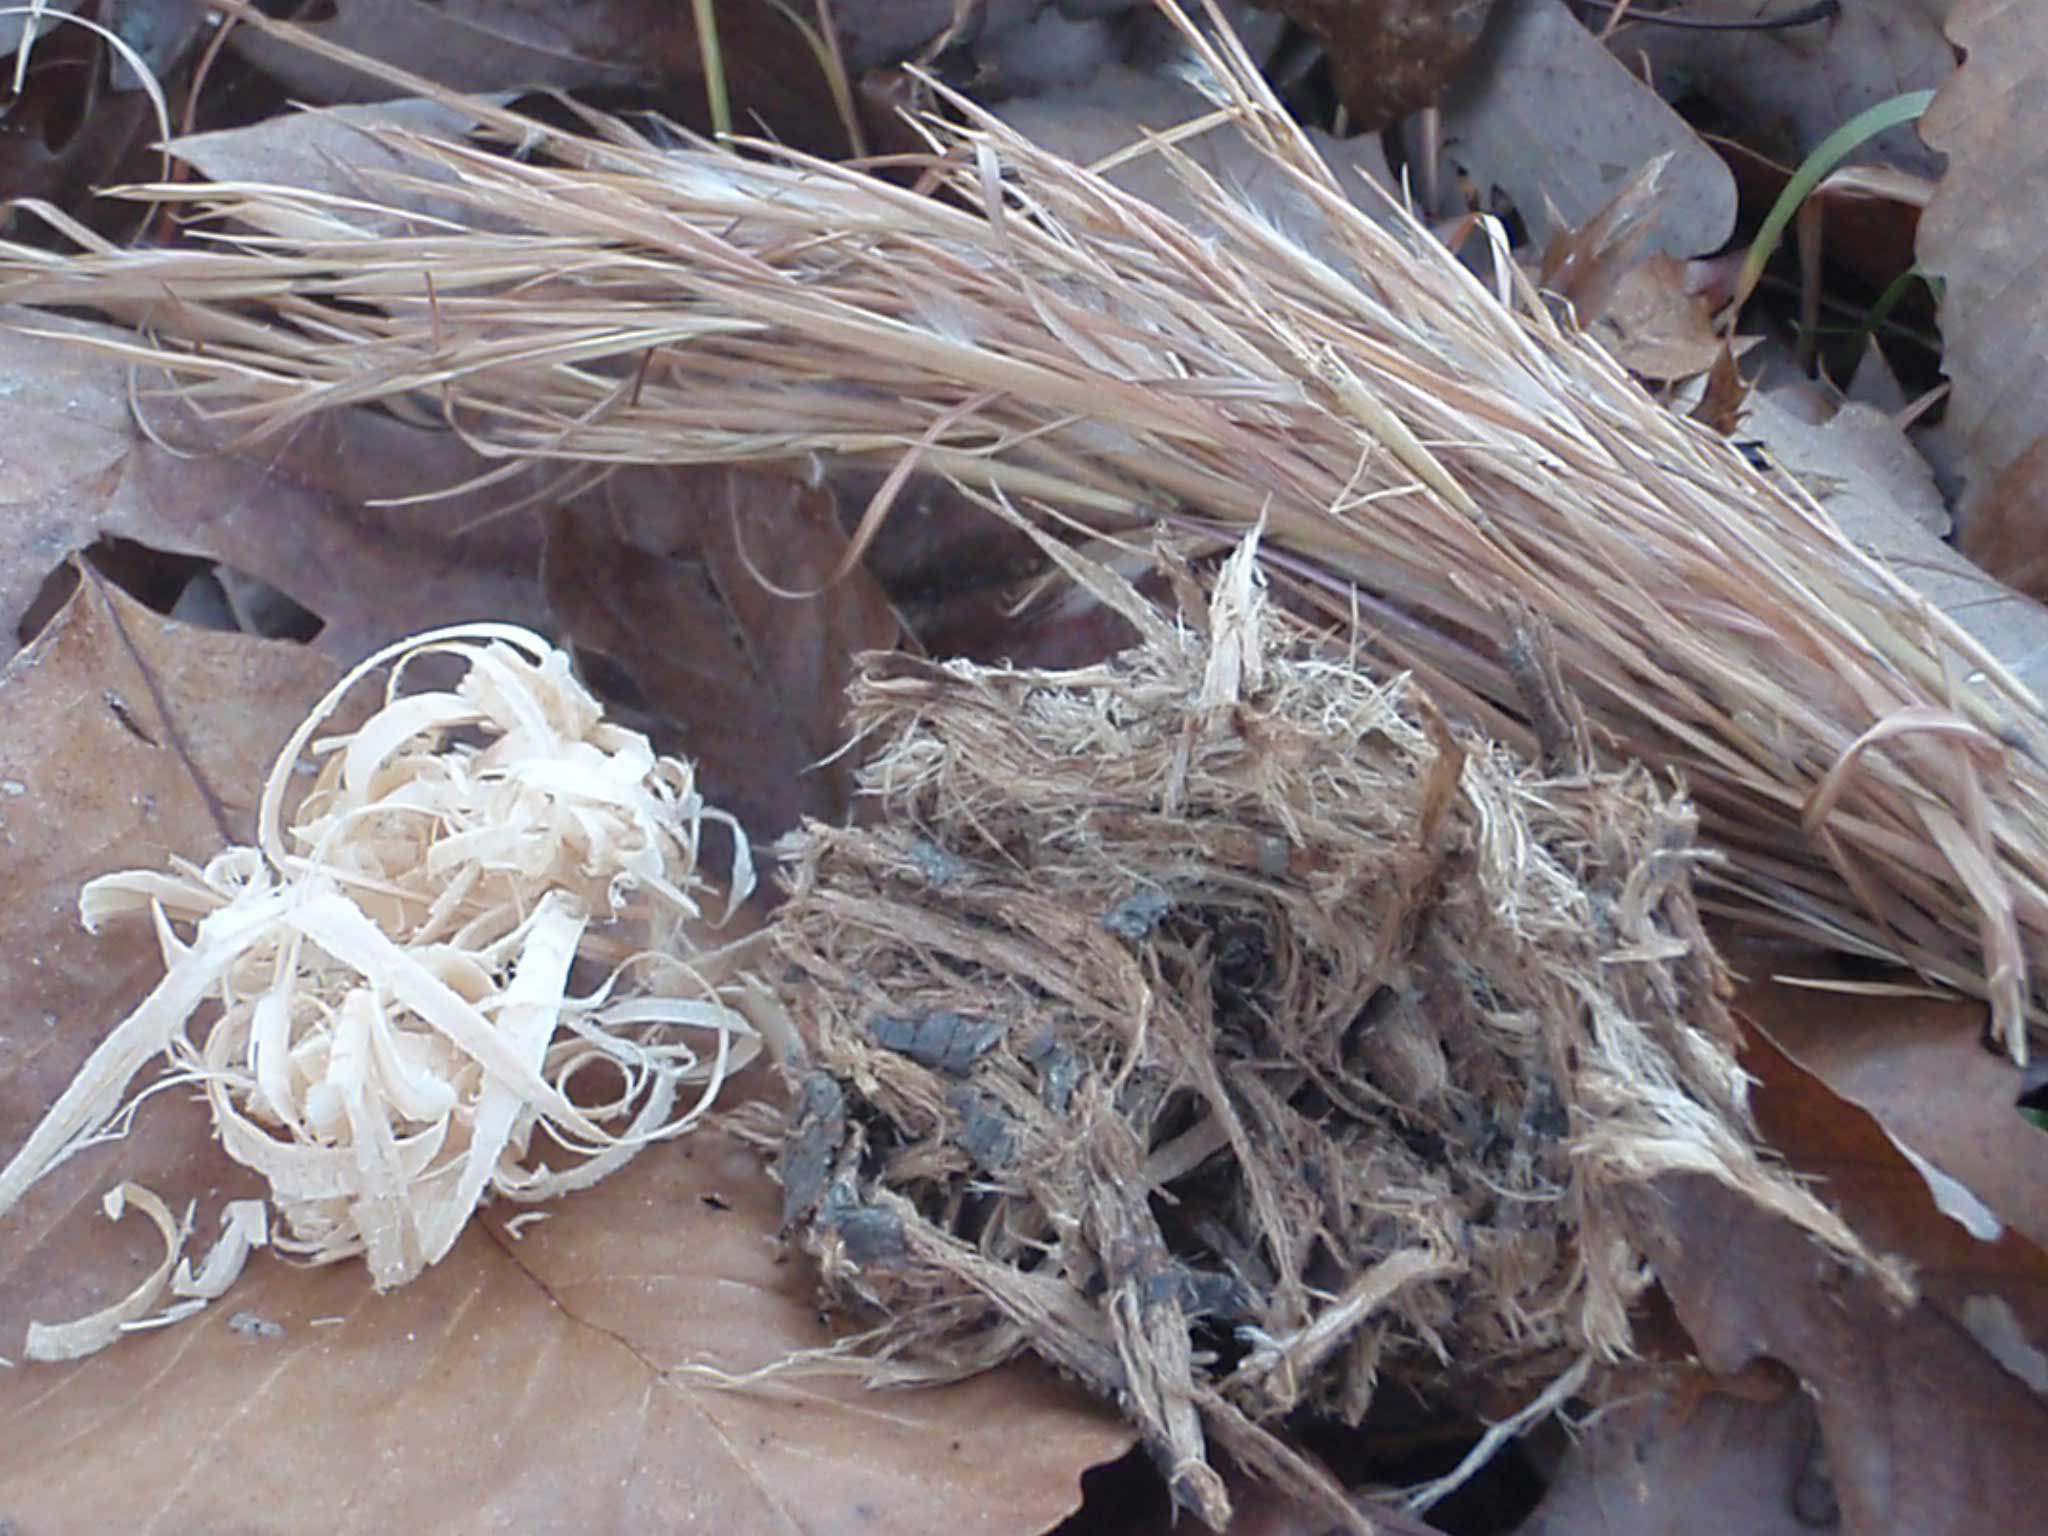 Bundles of dried wood, leaves, grass to be used for fire tinder.